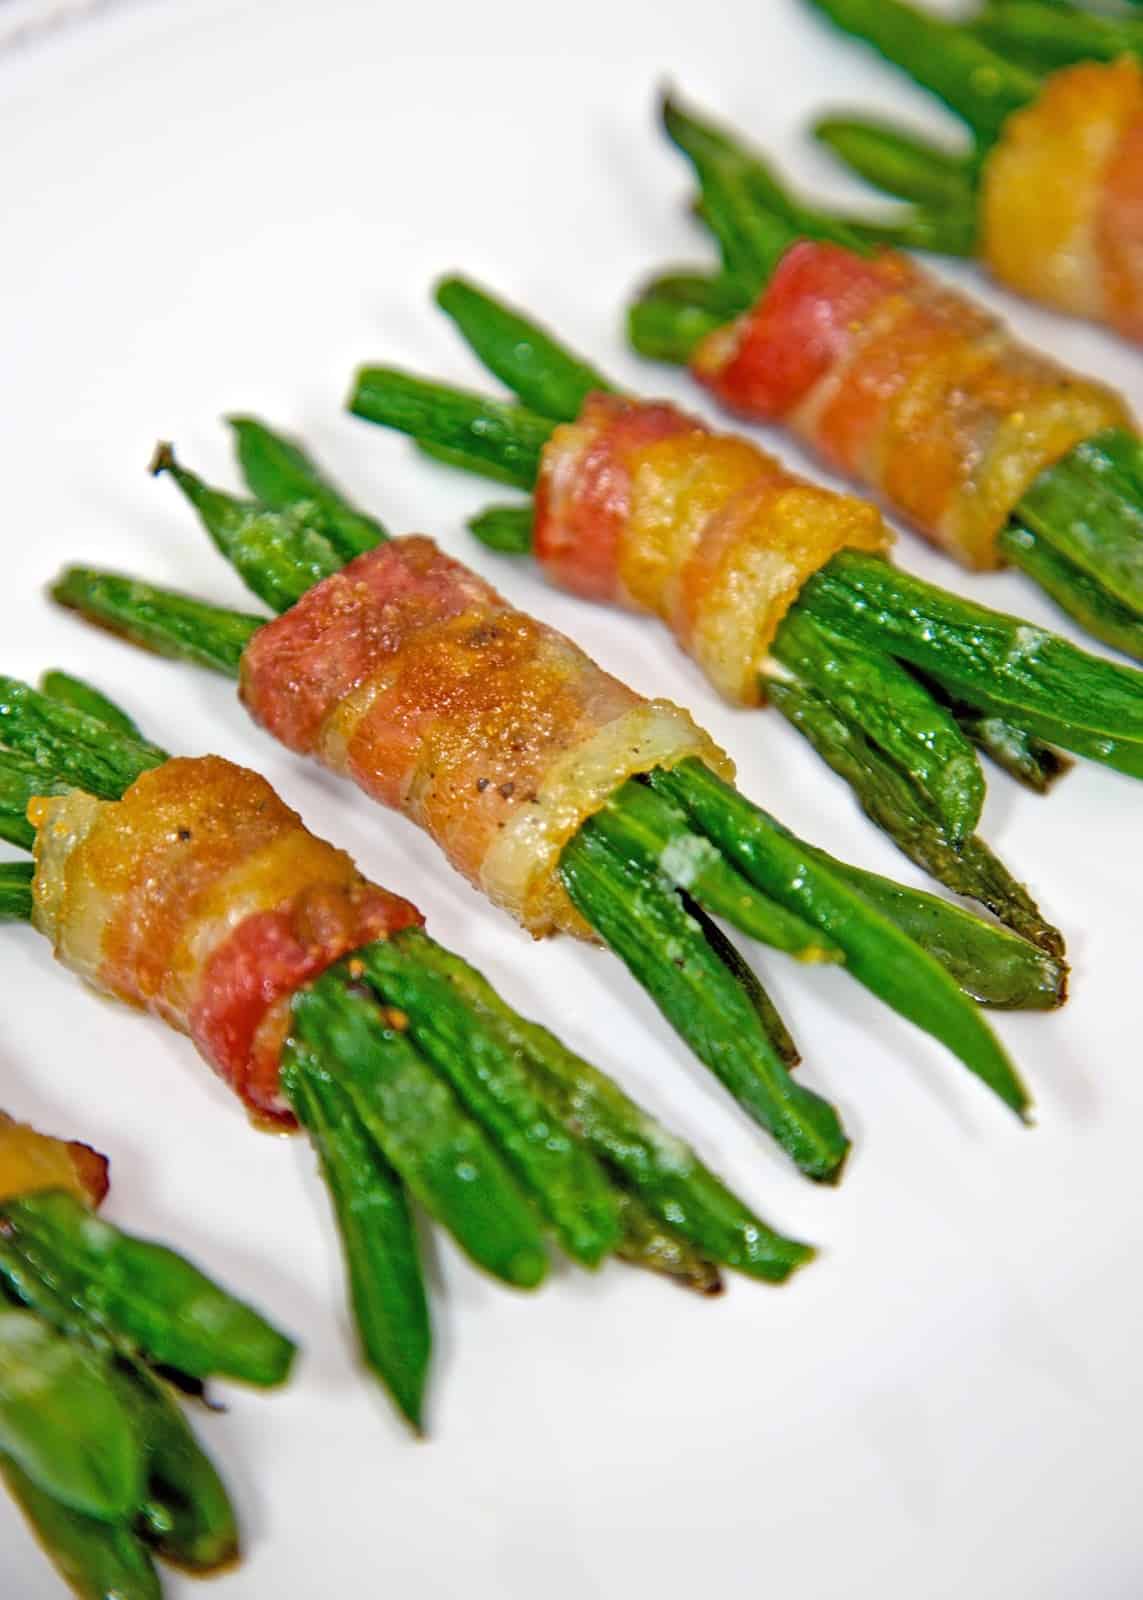 Green Bean Bundles with Bacon and Brown Sugar - simple side dish with tons of great flavors! Can assemble ahead of time and refrigerate until ready to bake.